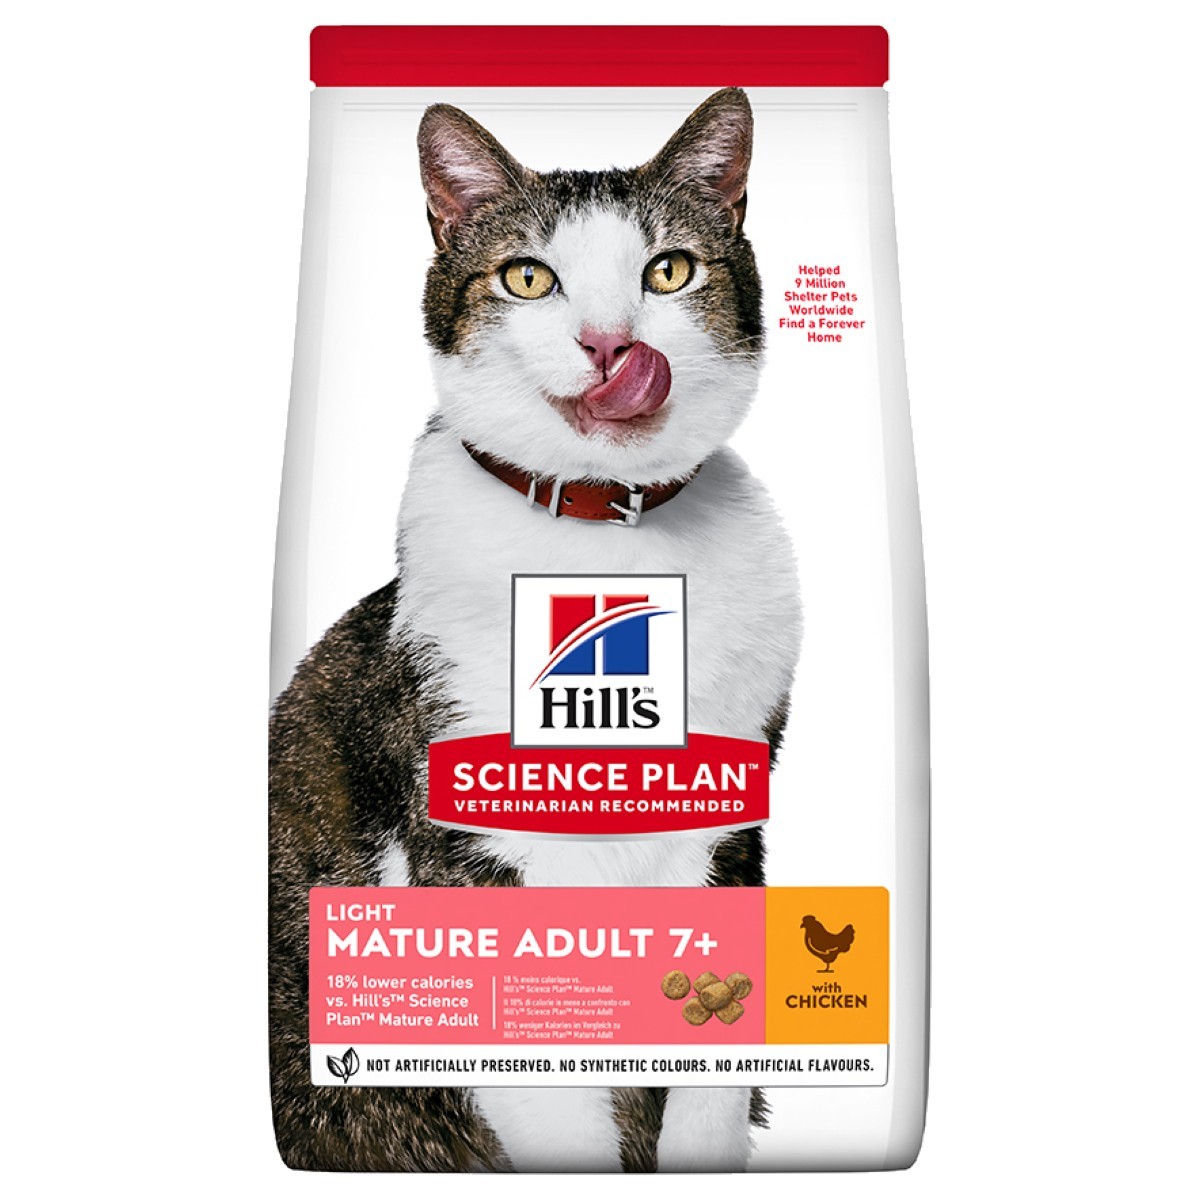 Hills Science Plan Mature Adult 7+ Dry Cat Food (Chicken) - From £15.23